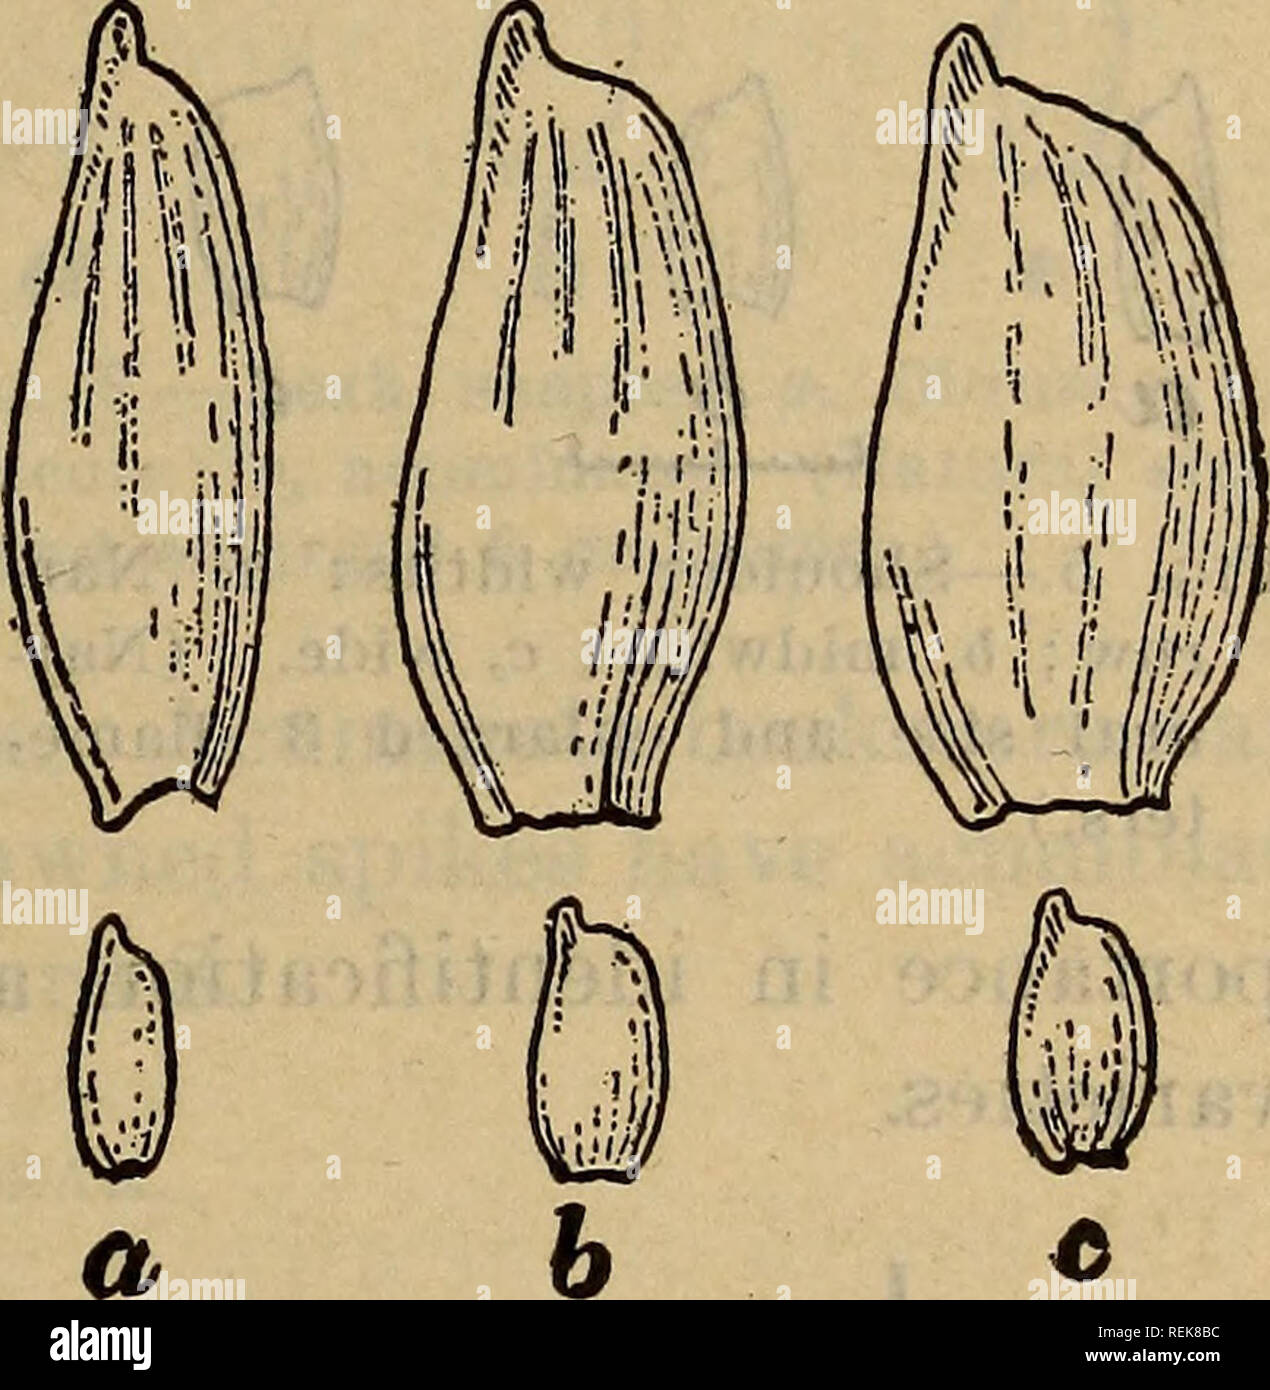 . Classification of American wheat varieties. Wheat; Wheat. CLASSIFICATION OF AMEKICAN WHEAT VARIETIES. 35 longer than the lemmas and is separated from the other species prin- cipally on this distinction. The length of the glume is here de- scribed as short, midlong, or long. Heuze (112) and Scofield (173) used essentially these same terms. Most varieties of wheat have midlong glumes. A few varieties, however, are distinct in having either short or long glumes. Short glumes may have lengths vary- ing from: 6 to 10 mm. Midlong glumes may vary from 8.5 to 12.5 mm., and long glumes from 11 to 15  Stock Photo